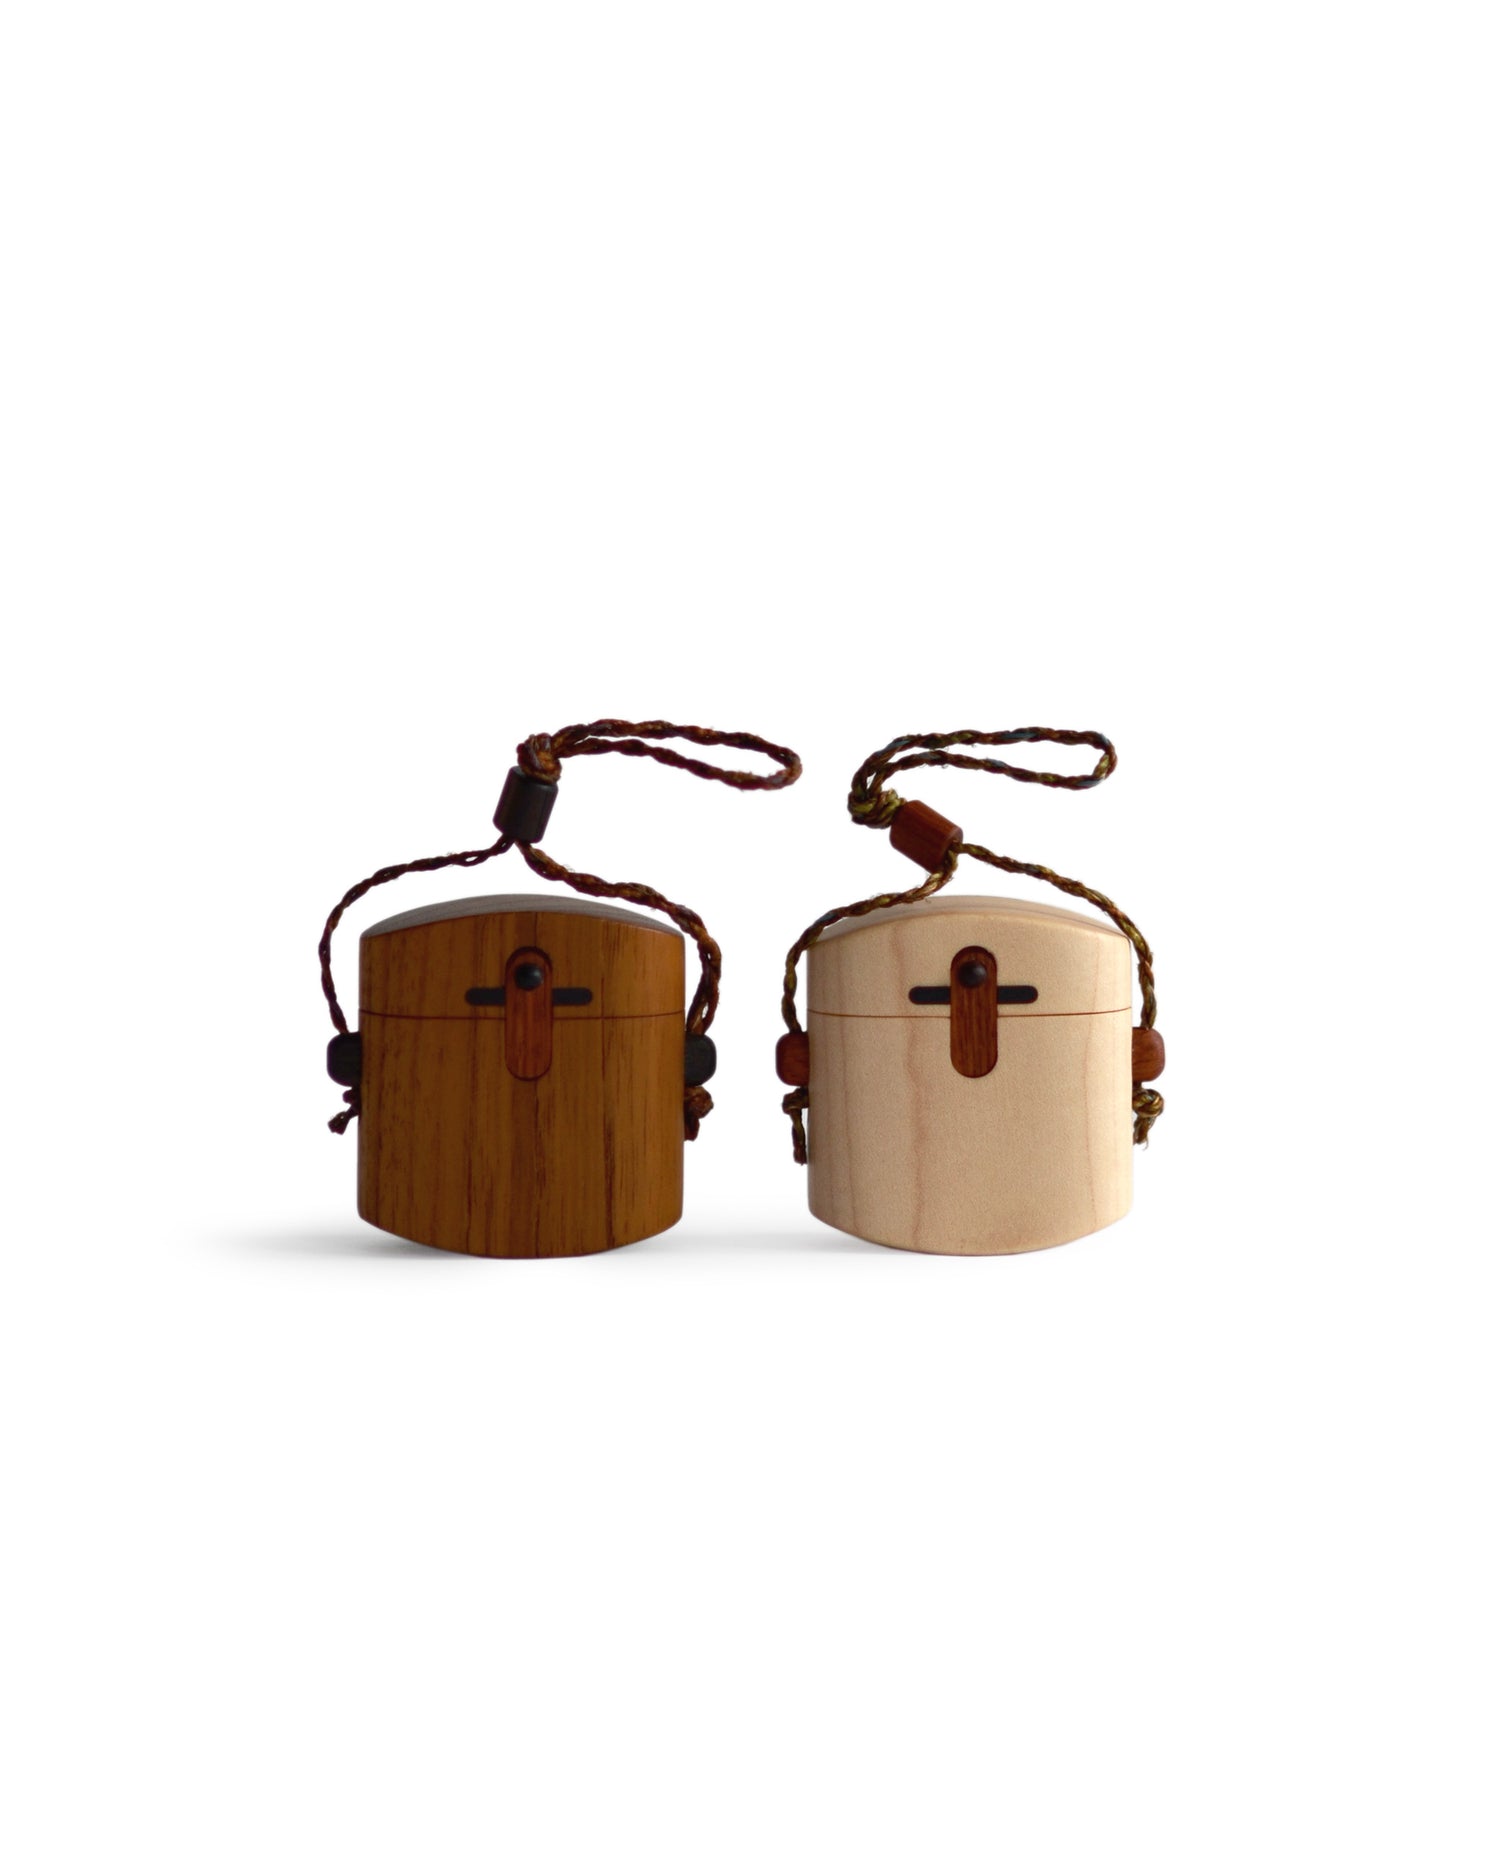 Silhouetted image of walnut and maple pill cases with cord by Norio Tanno against white background.